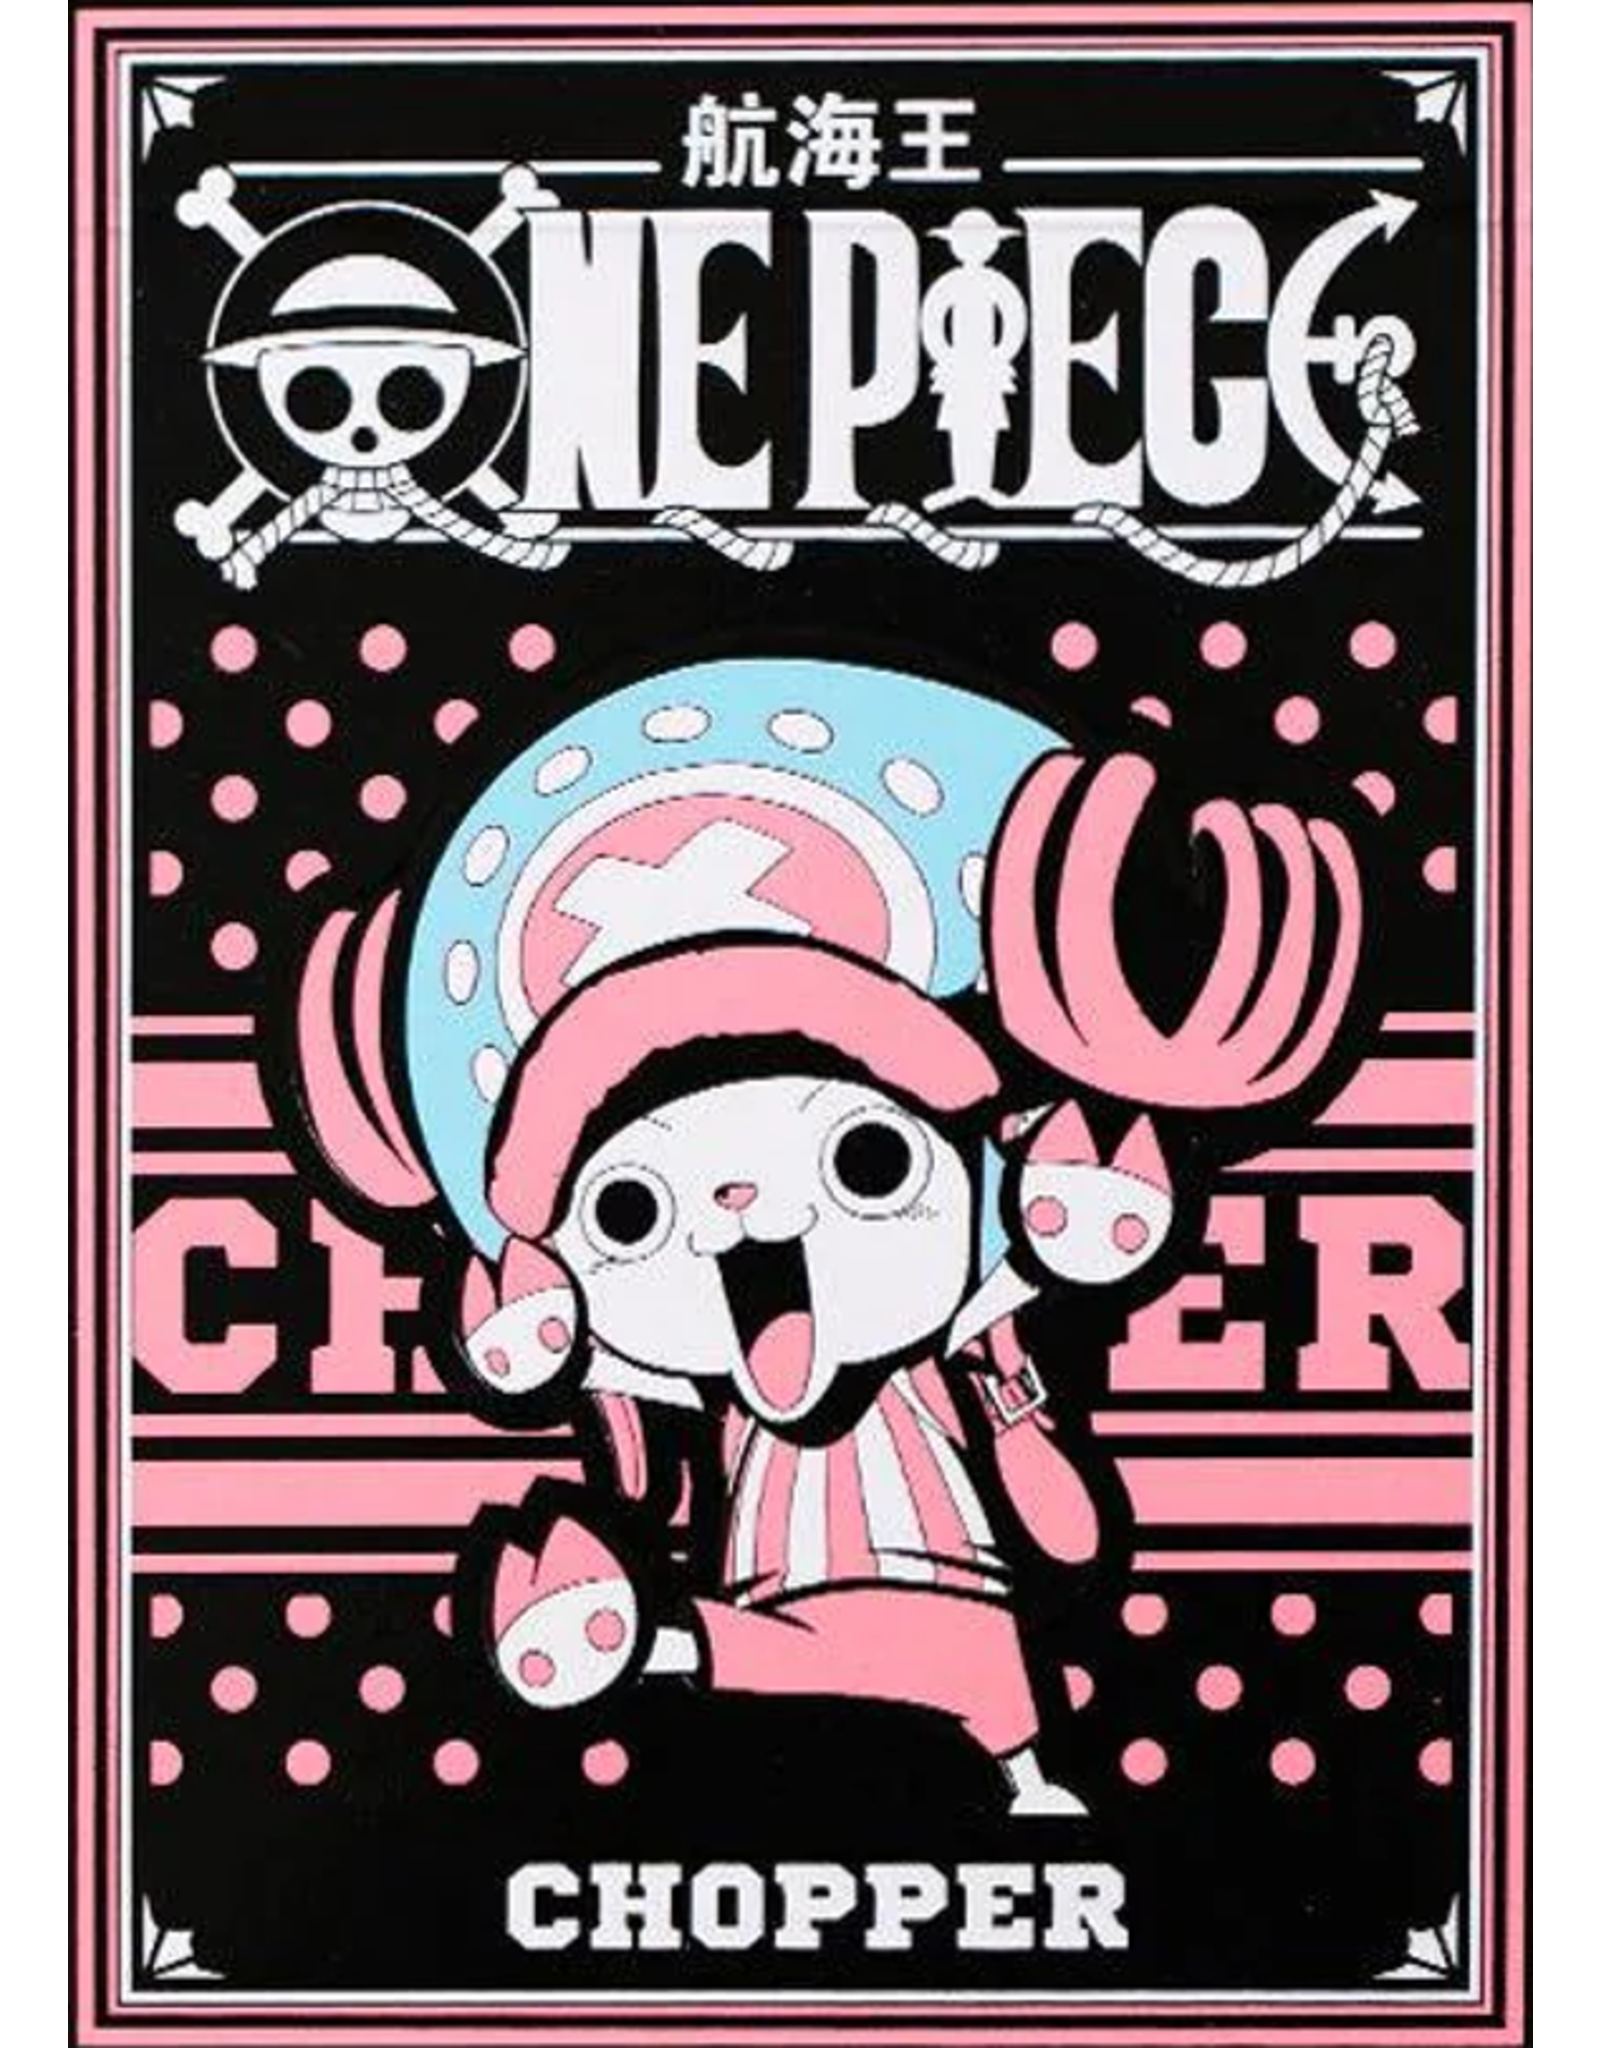 One Piece - Playing Cards (Chopper)